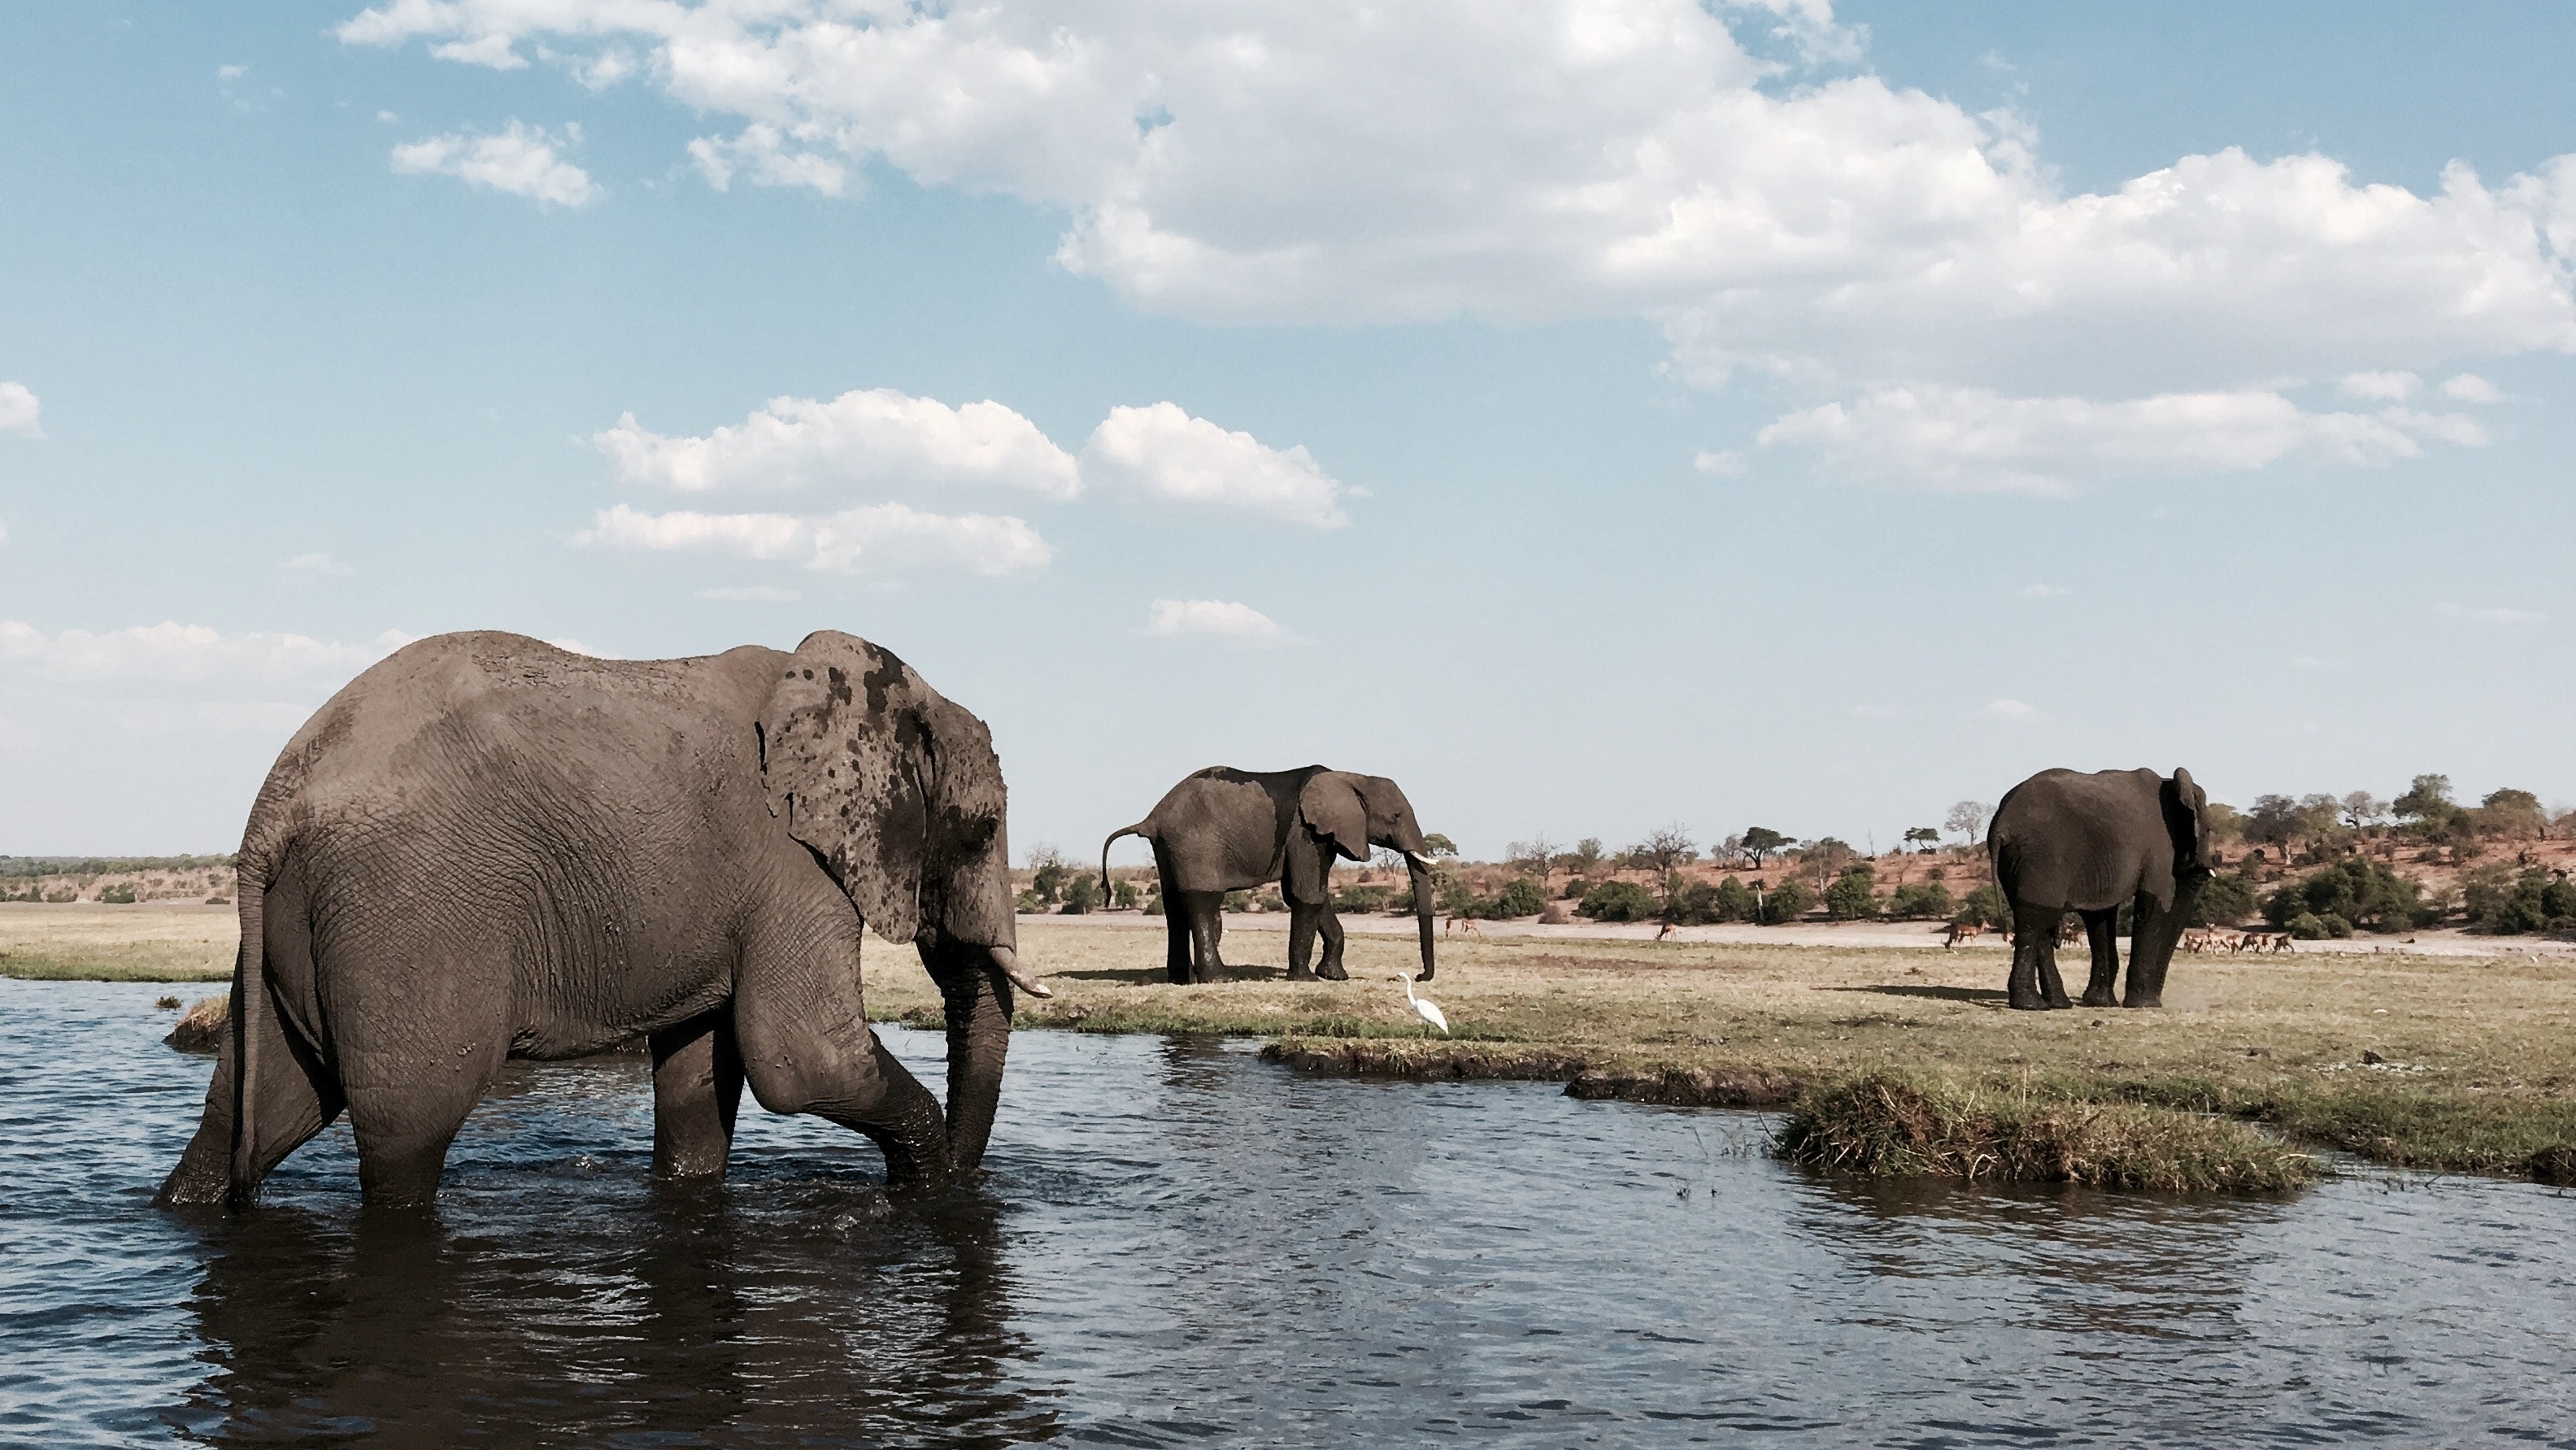 Toast your seventh decade with the trip of a lifetime. <a href="https://www.rothschildsafaris.com/">Rothschild Safaris</a>' 10-day <a href="https://www.rothschildsafaris.com/safaris/classic-botswana-explorer/">Classic Botswana Explorer</a> packs equal parts adventure and luxury, two things you need more of in life. Enjoy game drives in the Chobe National Park, the Moremi Wildlife Reserve, and Okavango Delta, keeping your eyes peeled for elephant herds and perhaps even the zebra migration (depending on the time of year). Also on the agenda: leopard tracking and elephant bush walks. Then, reach for the skies with a helicopter ride to see the delta's winding waters from above, perhaps even catching an aerial view of hippos.<p>Sign up to receive the latest news, expert tips, and inspiration on all things travel.</p><a href="https://www.cntraveler.com/newsletter/the-daily?sourceCode=msnsend">Inspire Me</a>